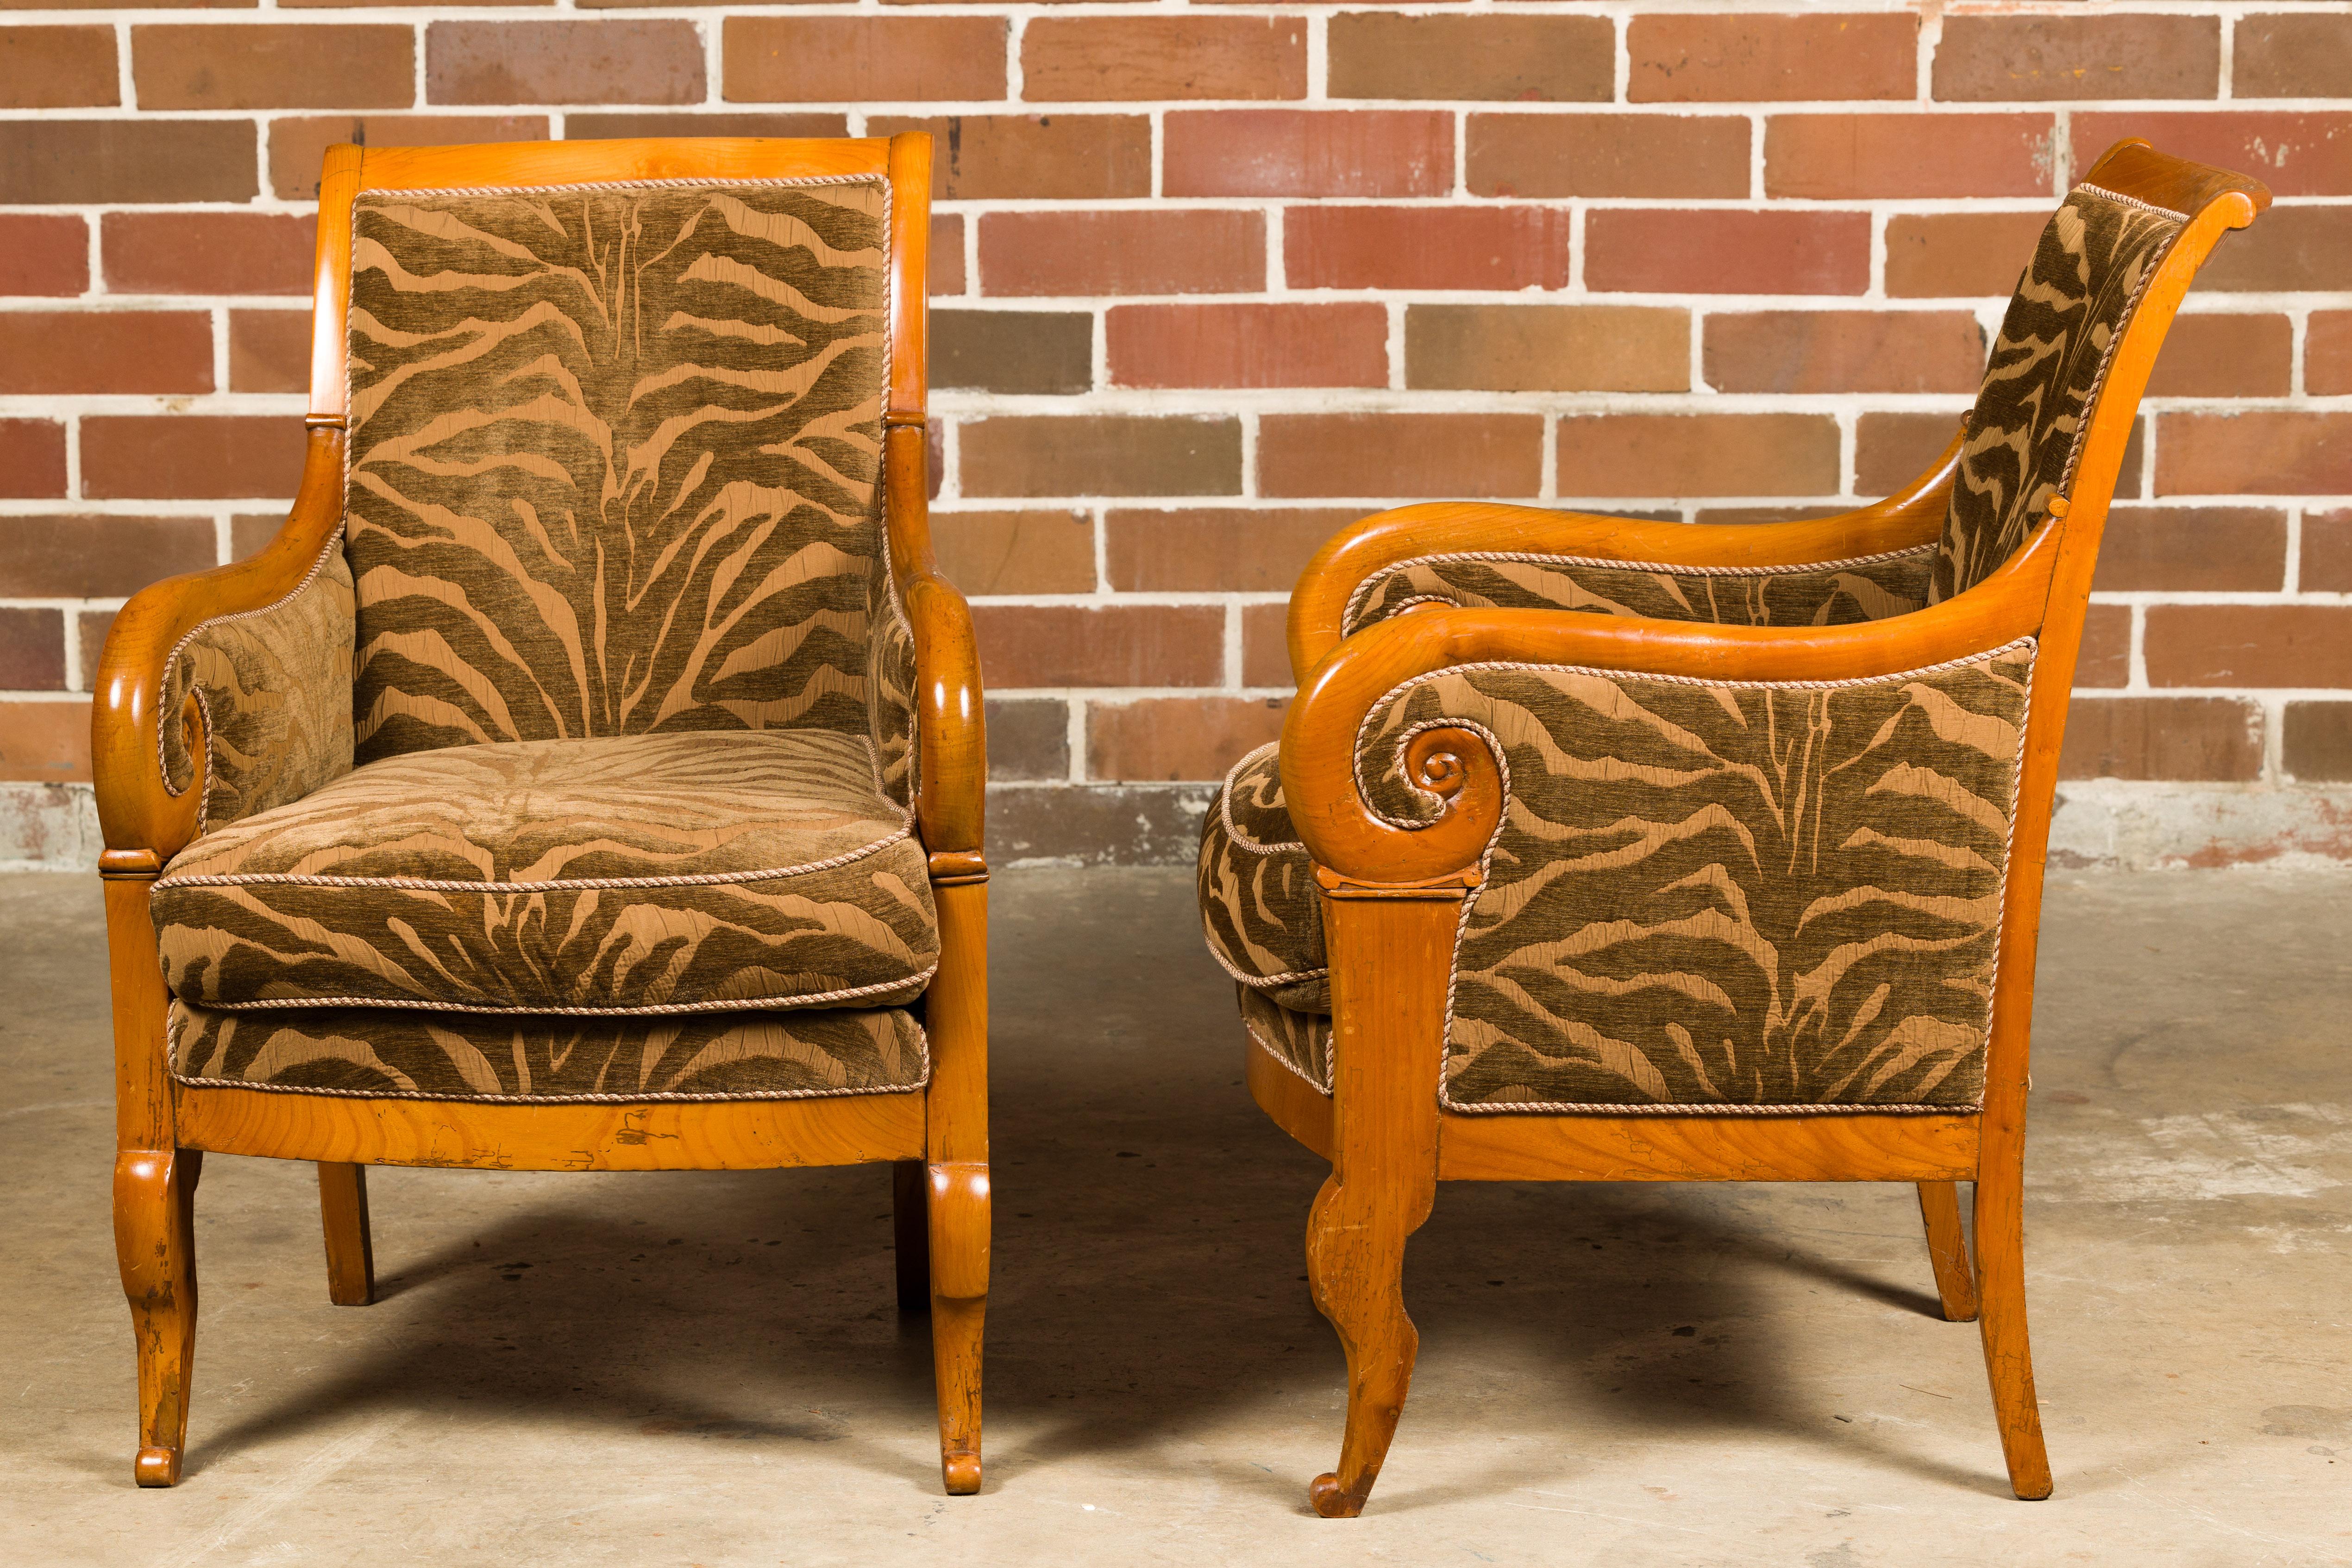 French Walnut 19th Century Bergère Chairs with Carved Arms and Zebra Upholstery For Sale 2